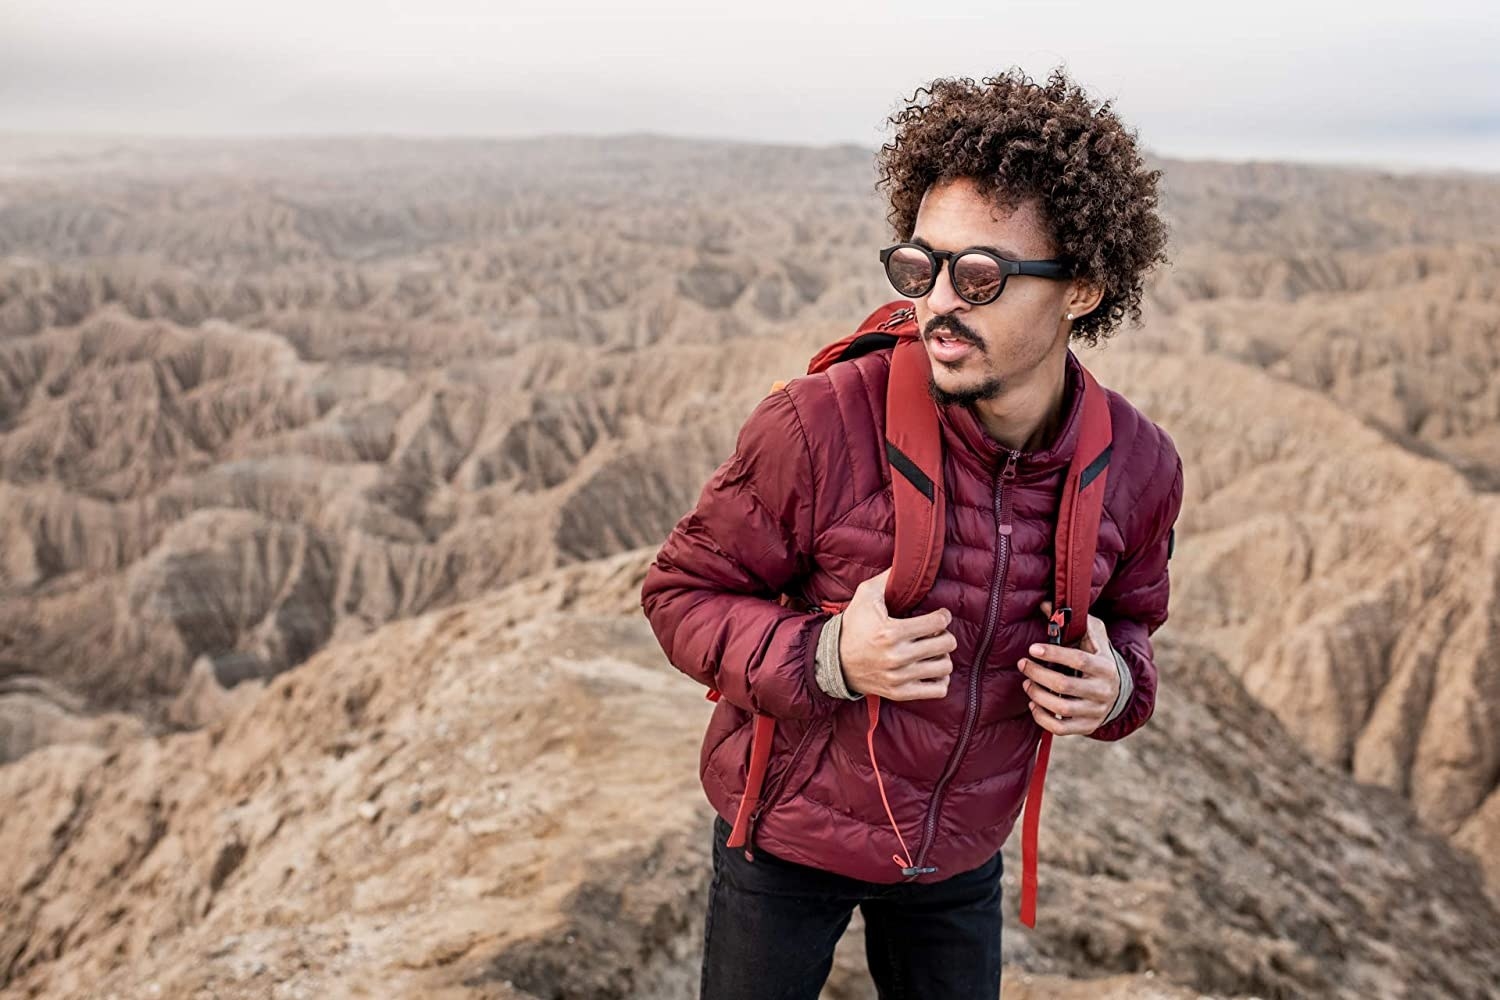 A person at the top of cliff wearing a jacket, backpack and sunglasses